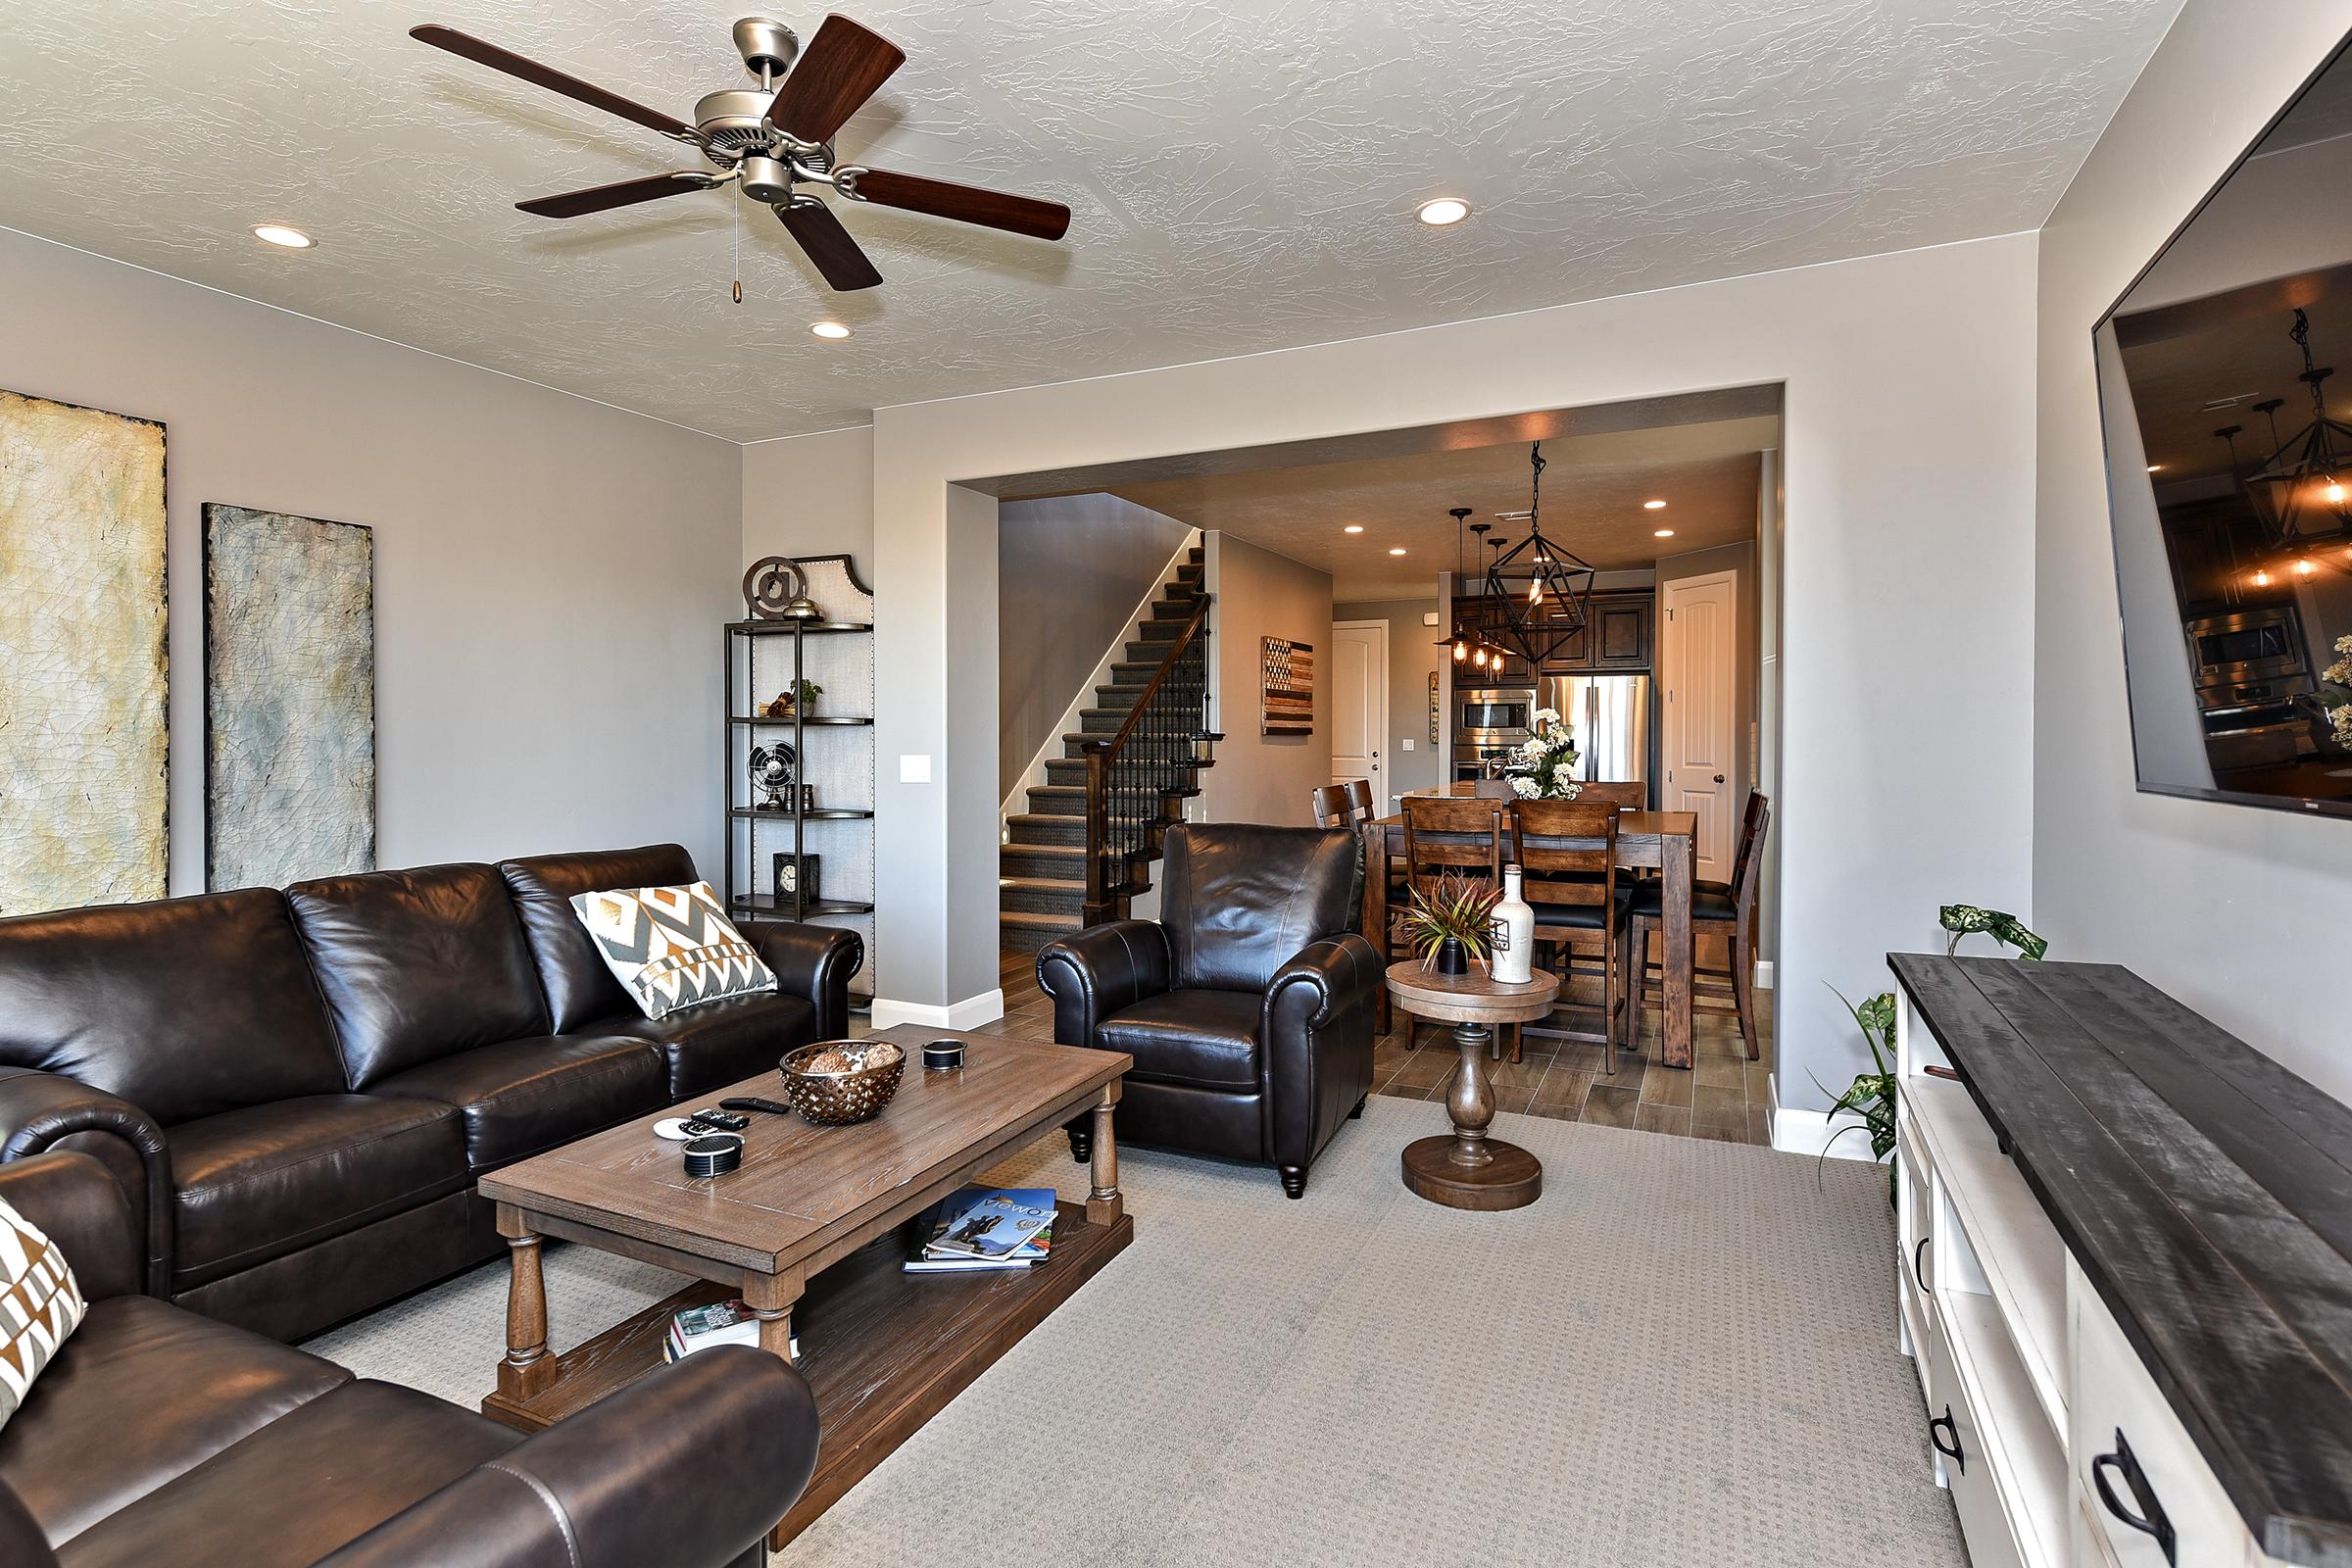 With an open and spacious floorplan, you can easily move from the Living Room to the Kitchen and Dining Room